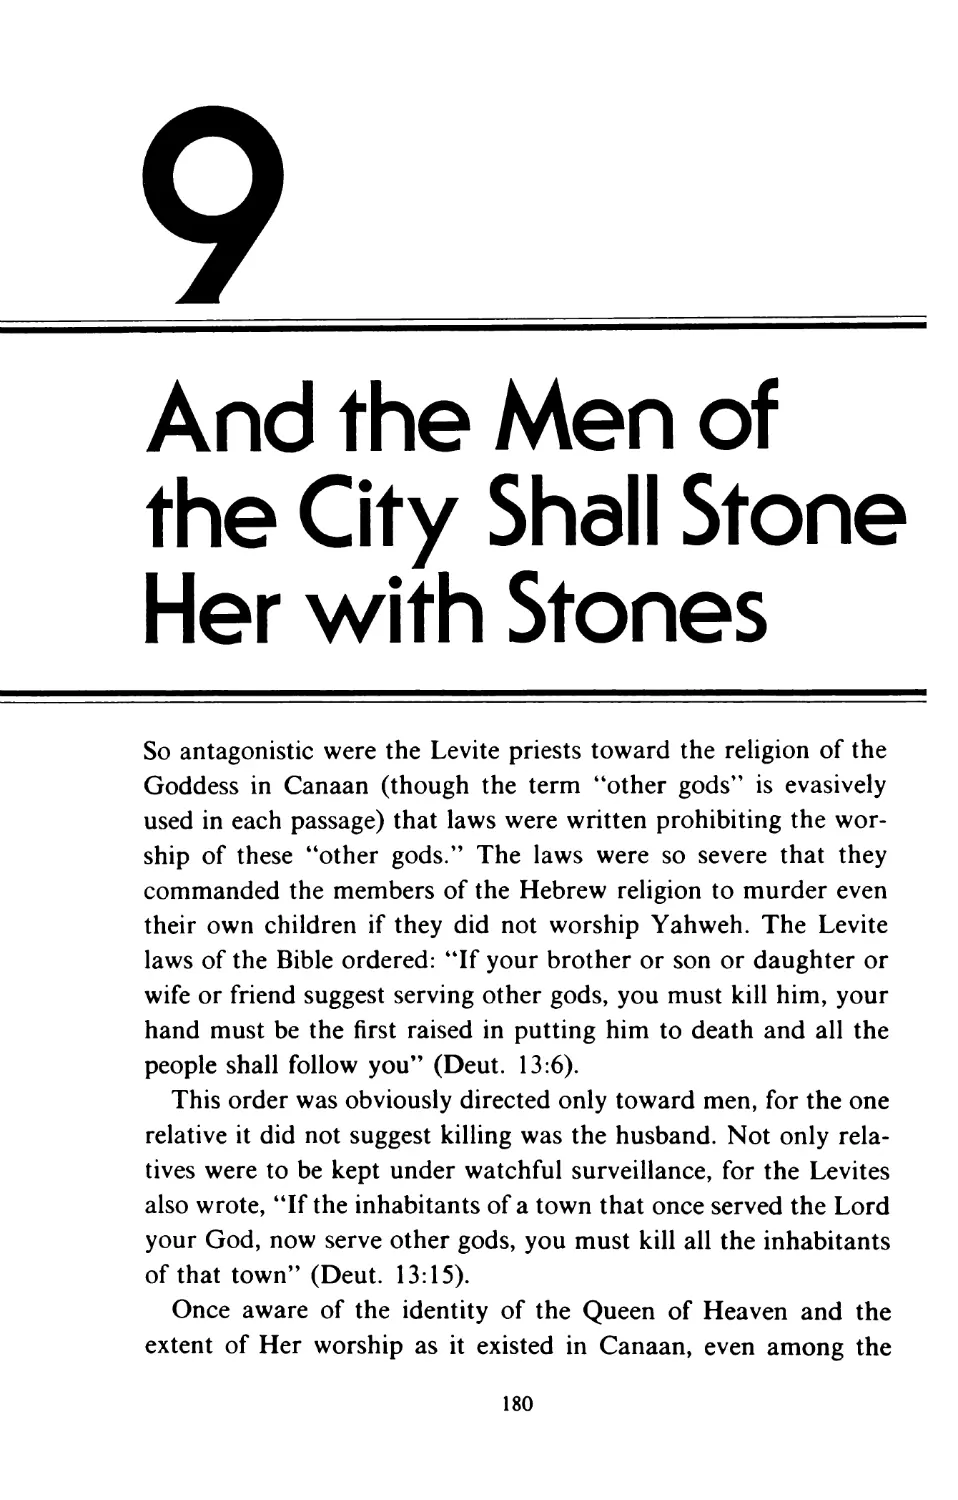 9 And the Men of the City Shall Stone Her with Stones